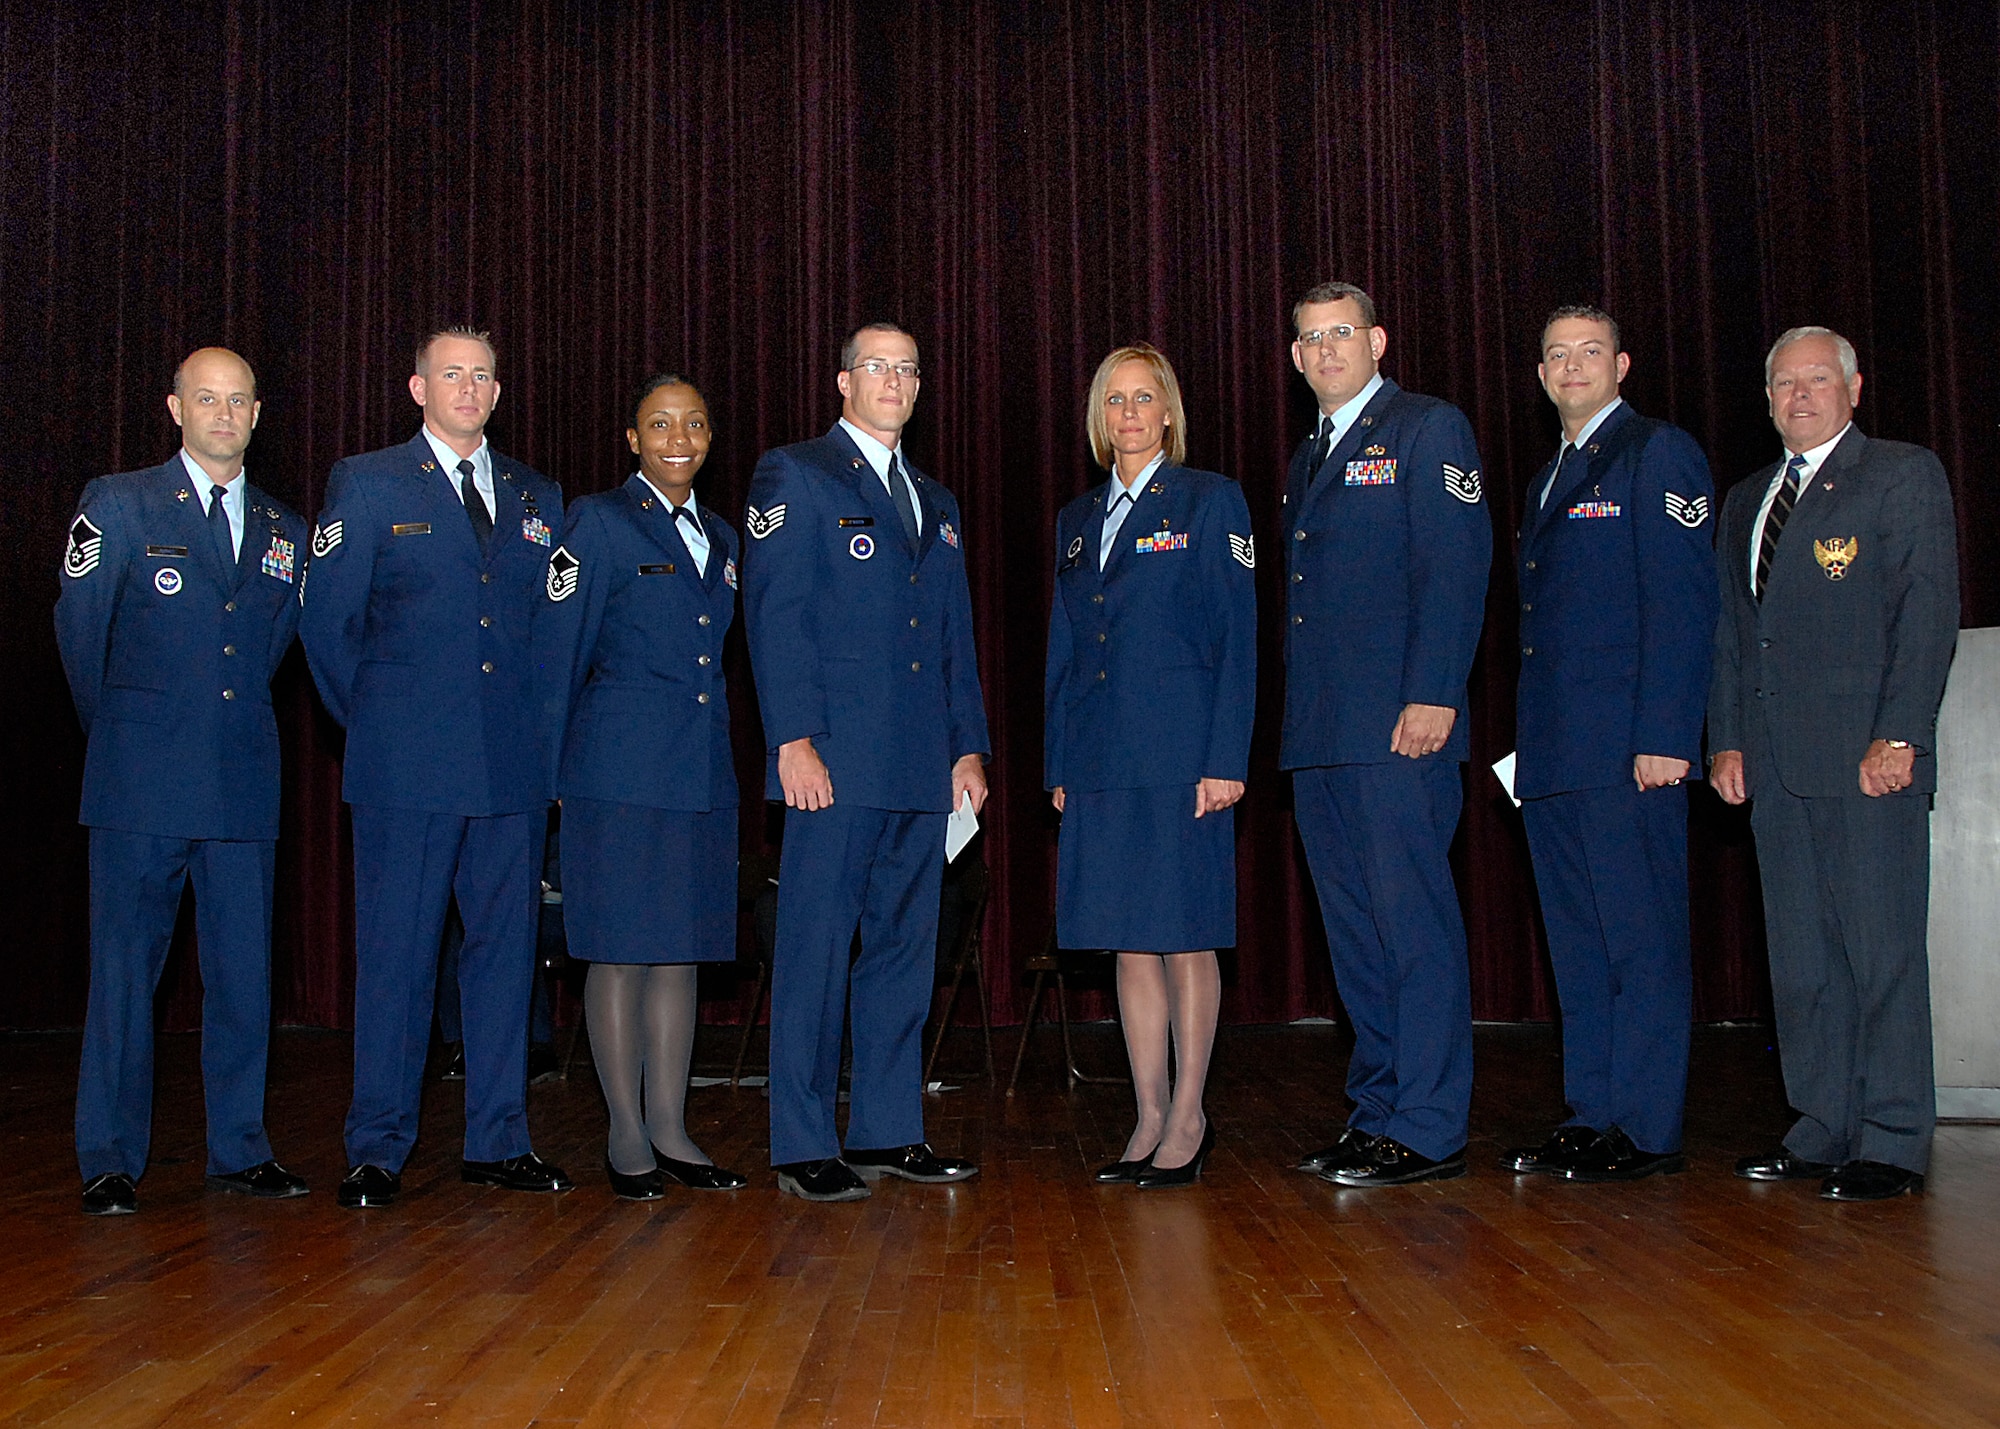 Seven Sheppard Airmen receive the Pitsenbarger award during the Sheppard Community College of the Air Force graduation at the base theater April 24. Pictured from left to right are, Master Sgt. Jeffrey Berndt, 366th Training Squadron, Staff Sgt. Clinton Dykes, 80th Operation Support Sqaudron, Master Sgt. Veronica Eddie, 80th OSS, Staff Sgt. Mickael O’Brien, 365th TRS, Tech. Sgt. Trisha Plummer, 383rd TRS, Tech. Sgt. Donald Remer, 982nd Maintenance Squadron, and Staff Sgt. Gregory Willet, 383rd TRS.  Retired Col. William Miller was the presenter of the award. (U.S. Air Force photo/ Harry Tonemah)